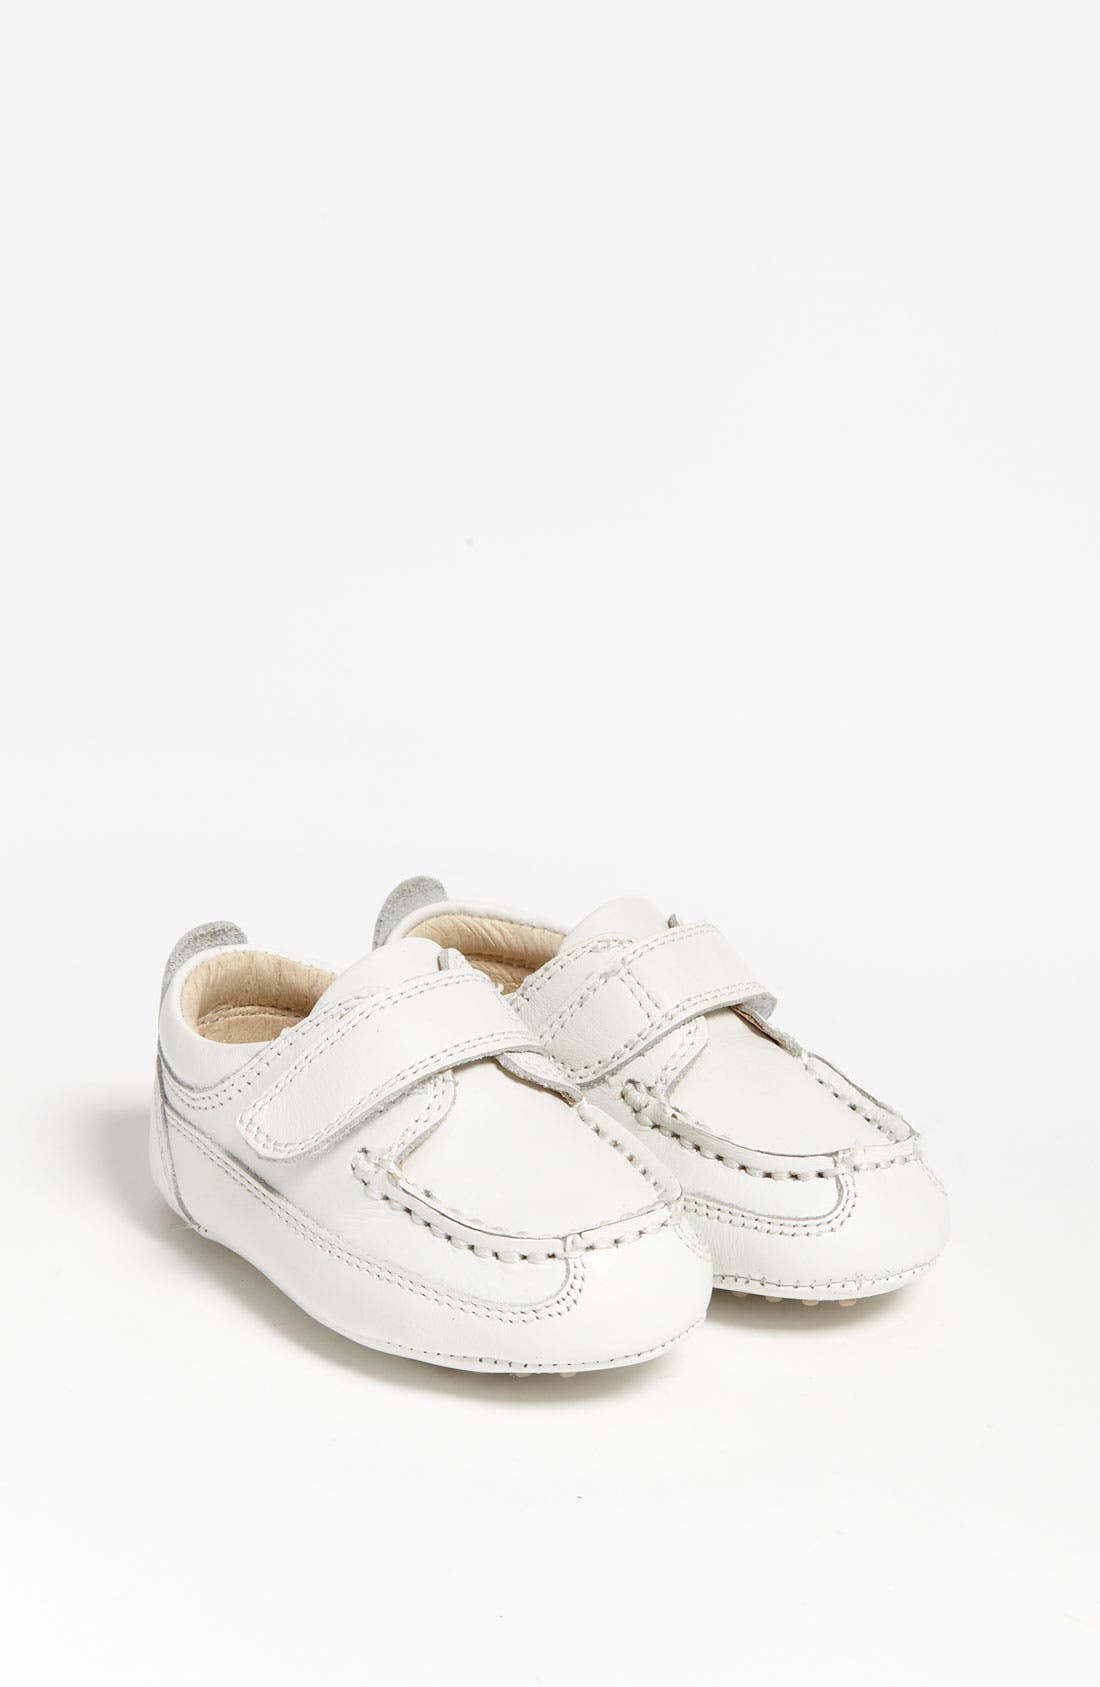 baby cole haan shoes